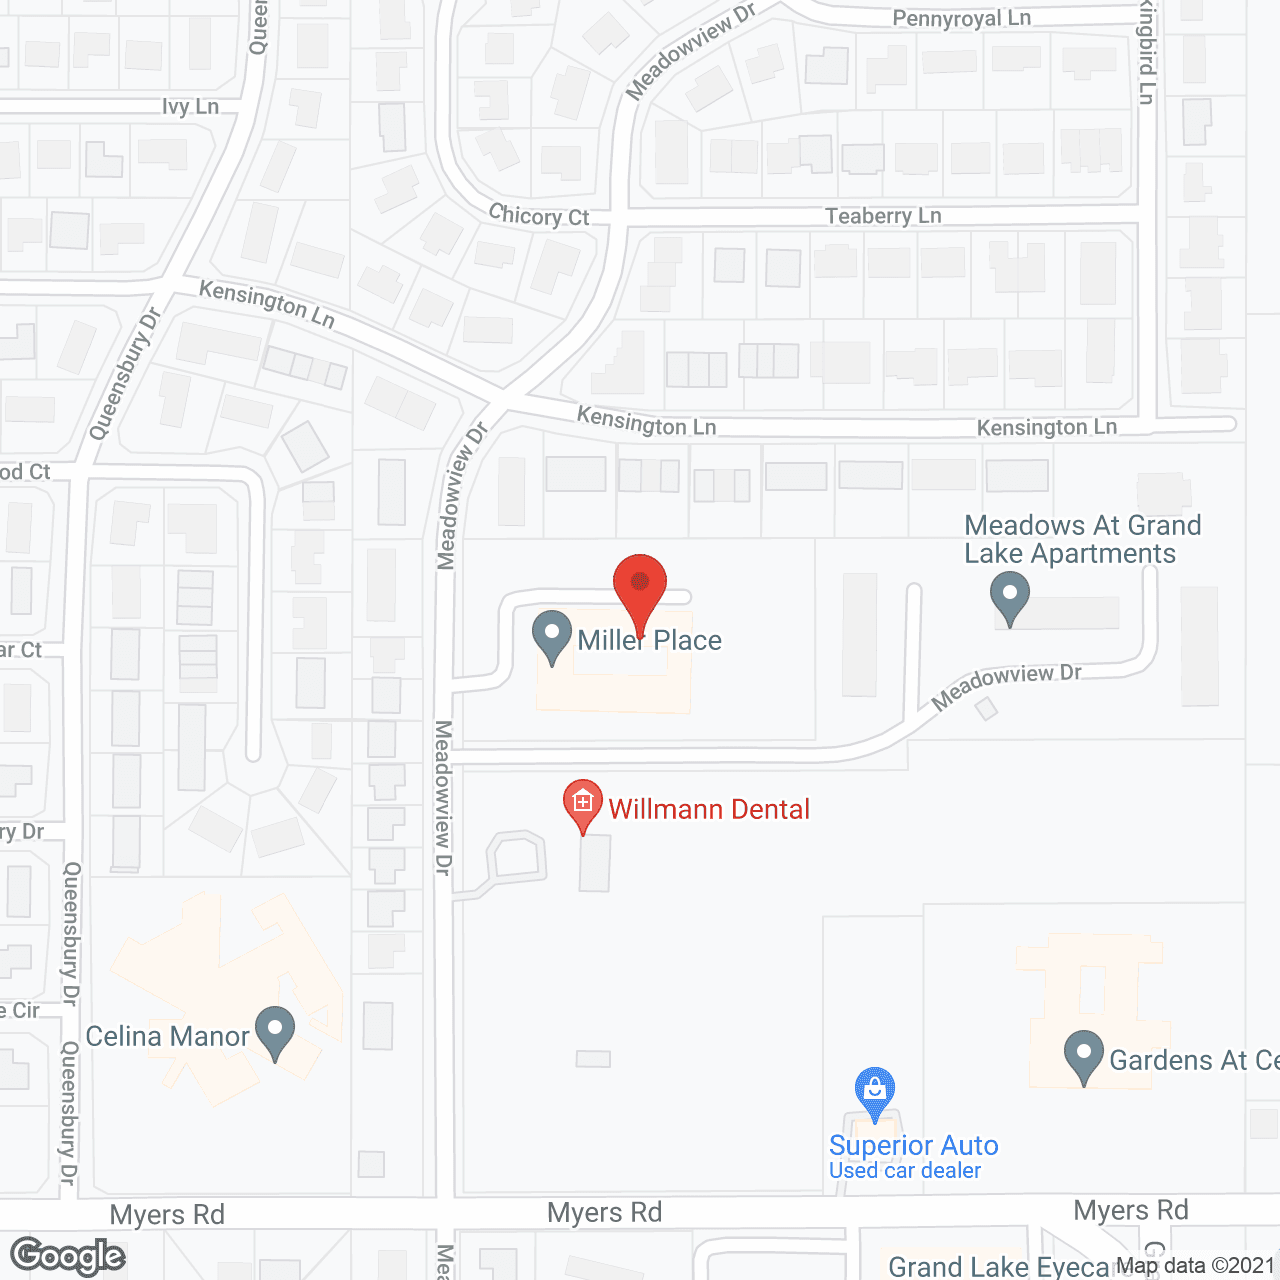 Trustwell Living at Miller Place in google map